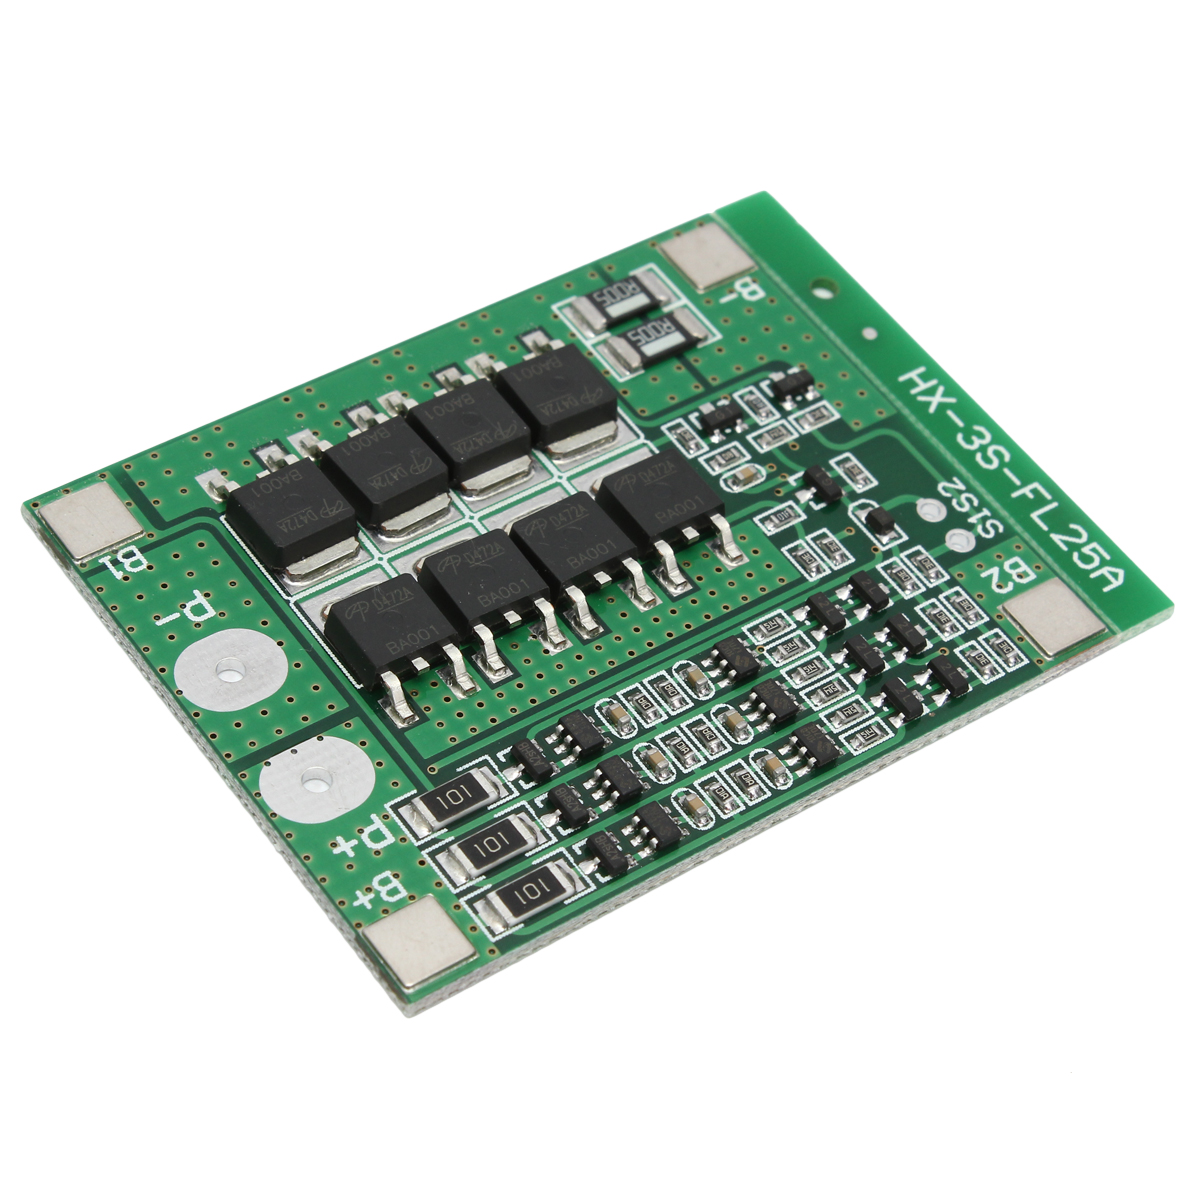 50pcs-3S-111V-25A-18650-Li-ion-Lithium-Battery-BMS-Protection-PCB-Board-With-Balance-Function-1388425